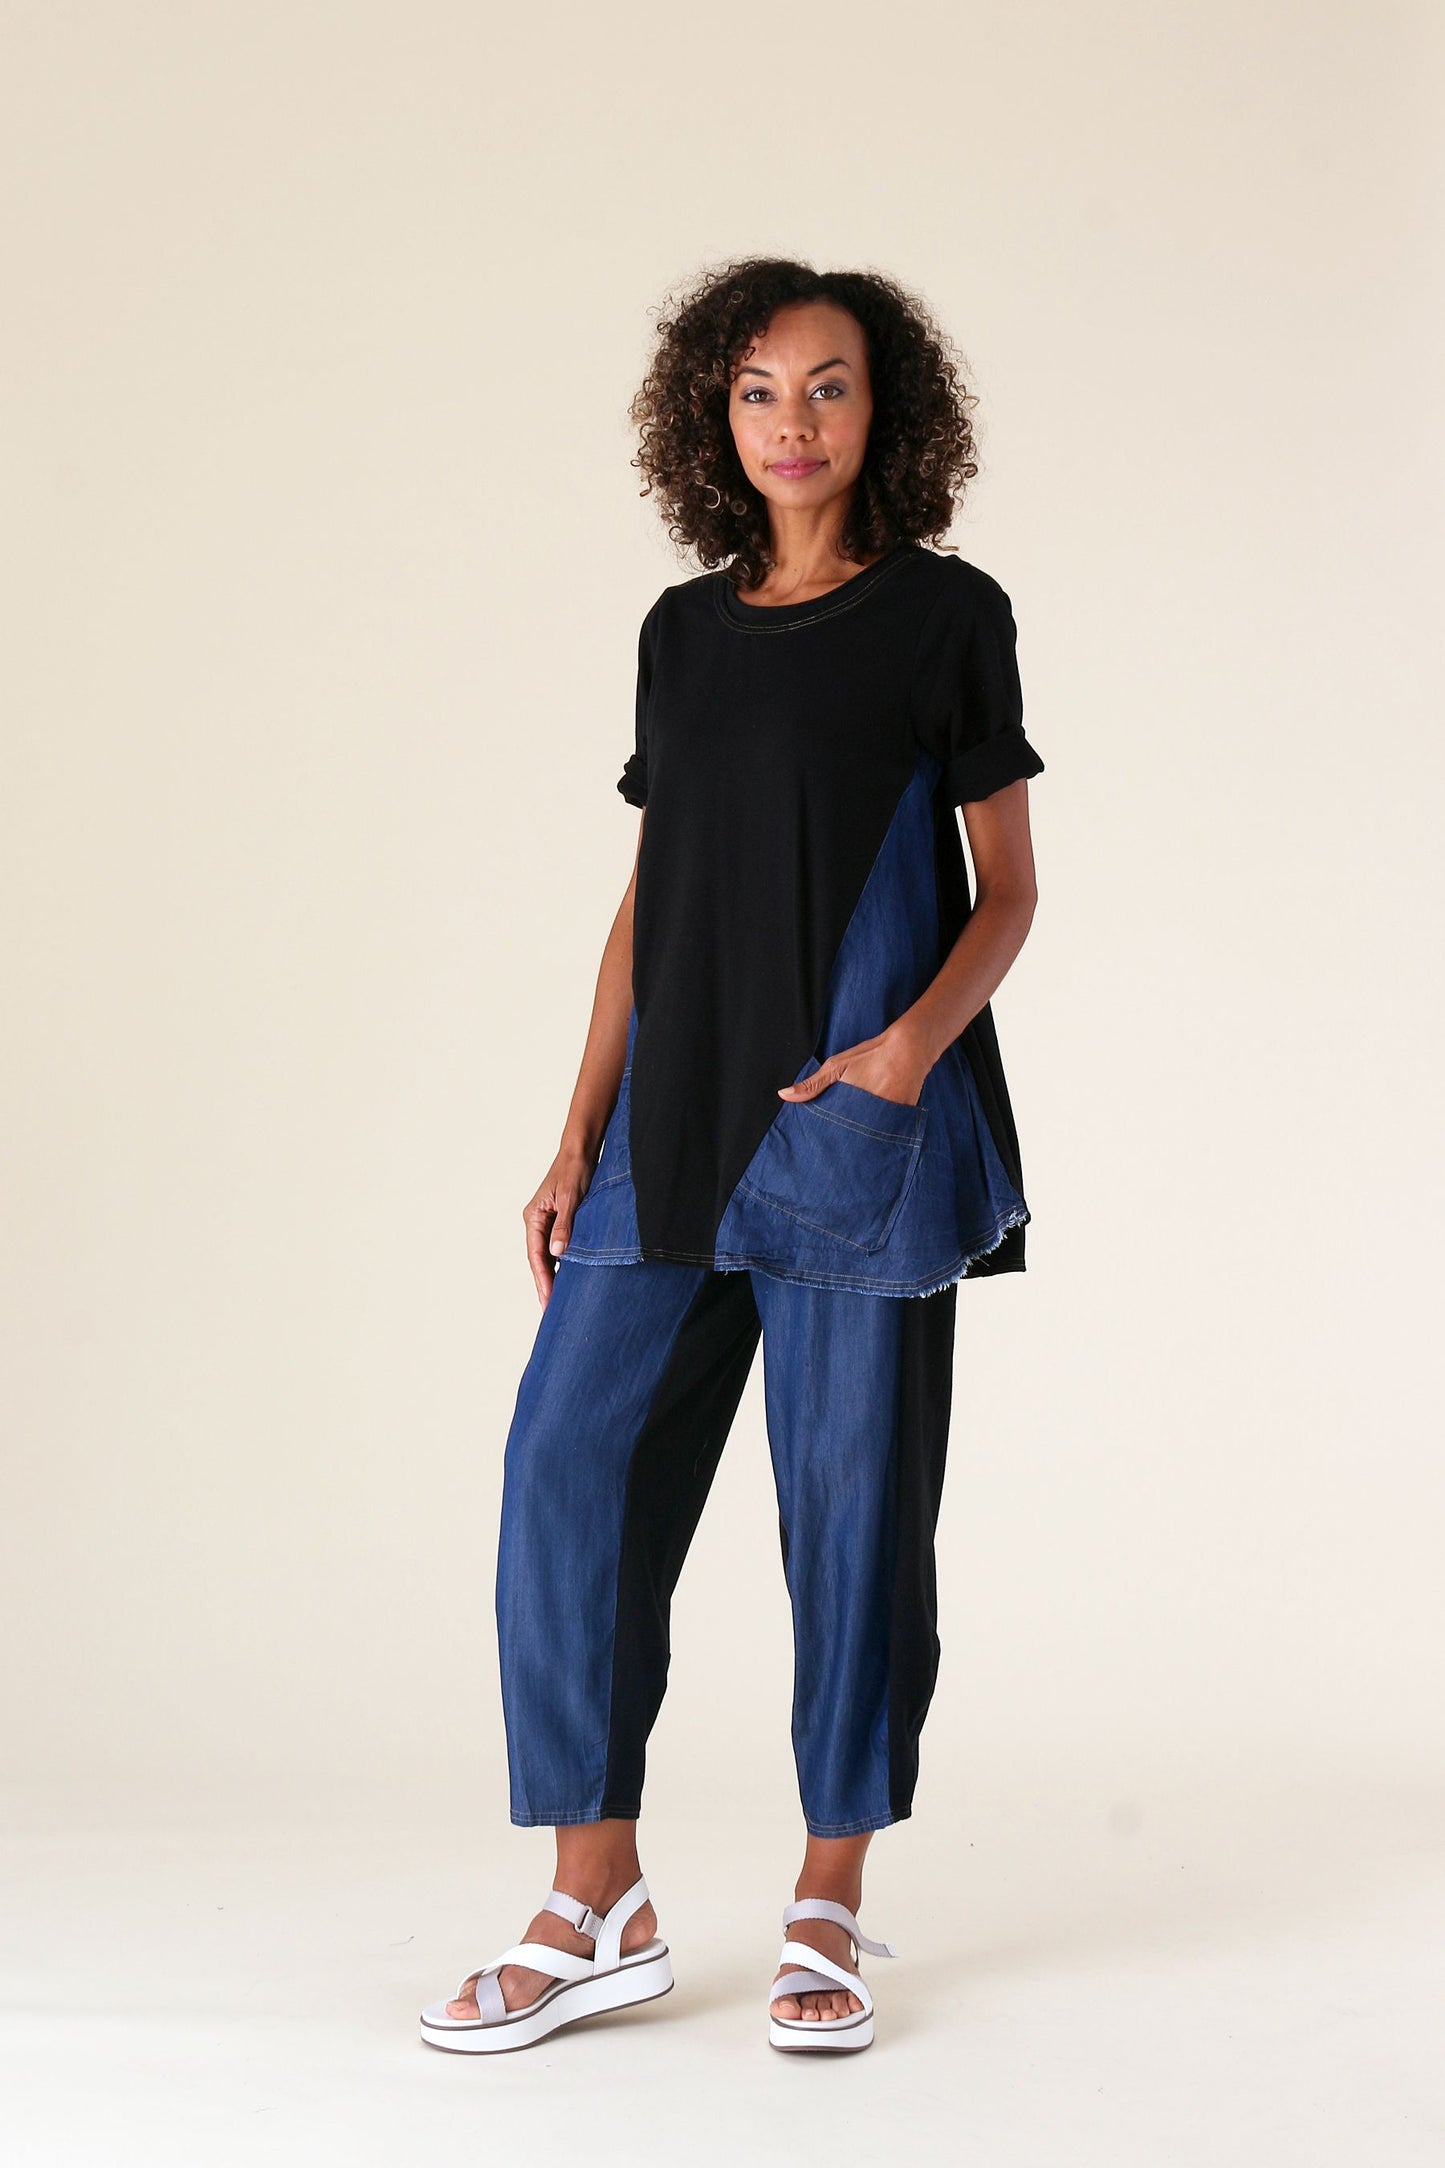 Black with Denim Accents Short Sleeve Top with Pockets